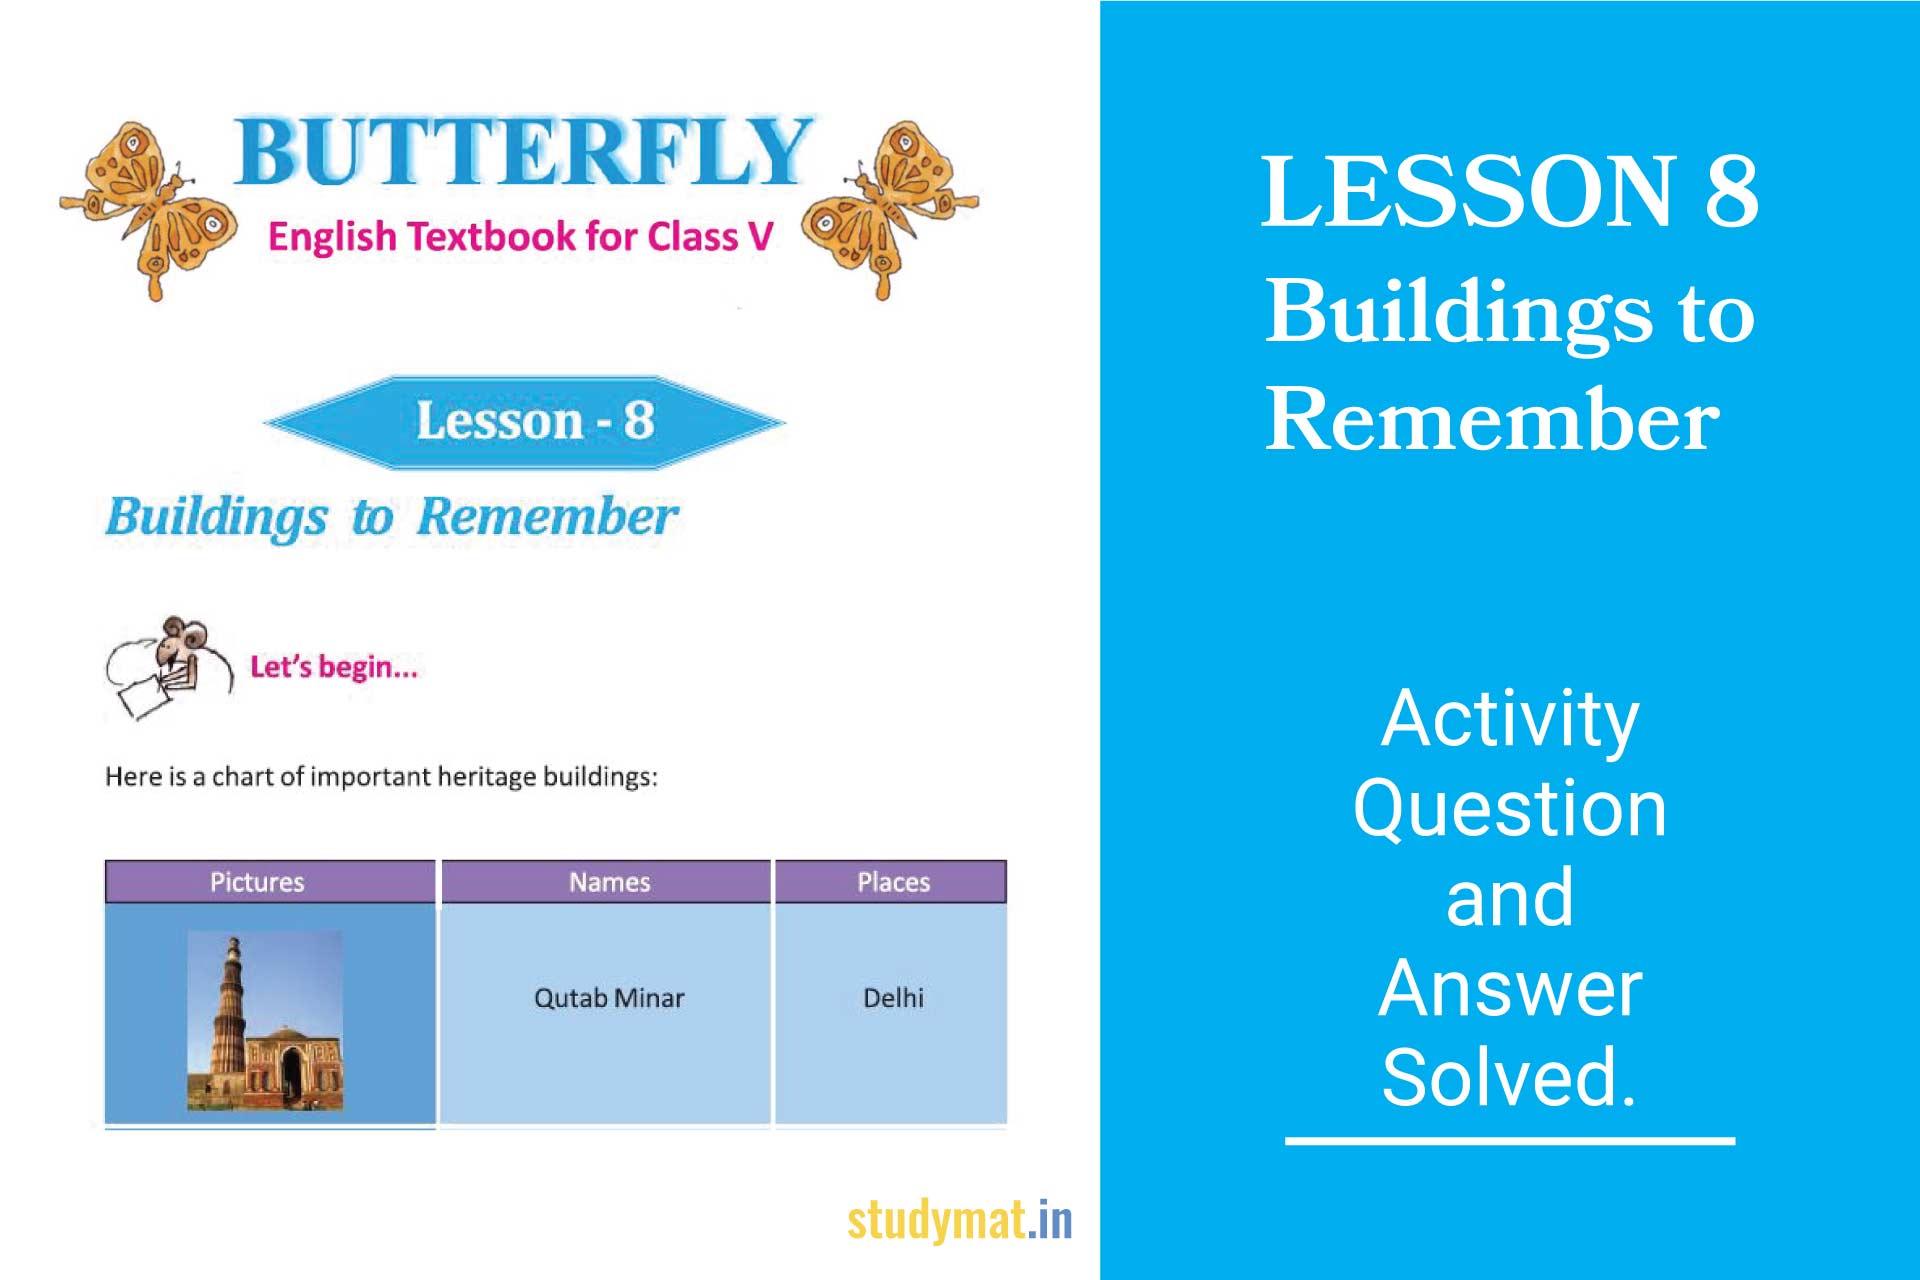 Building to Remember - Question & Answer